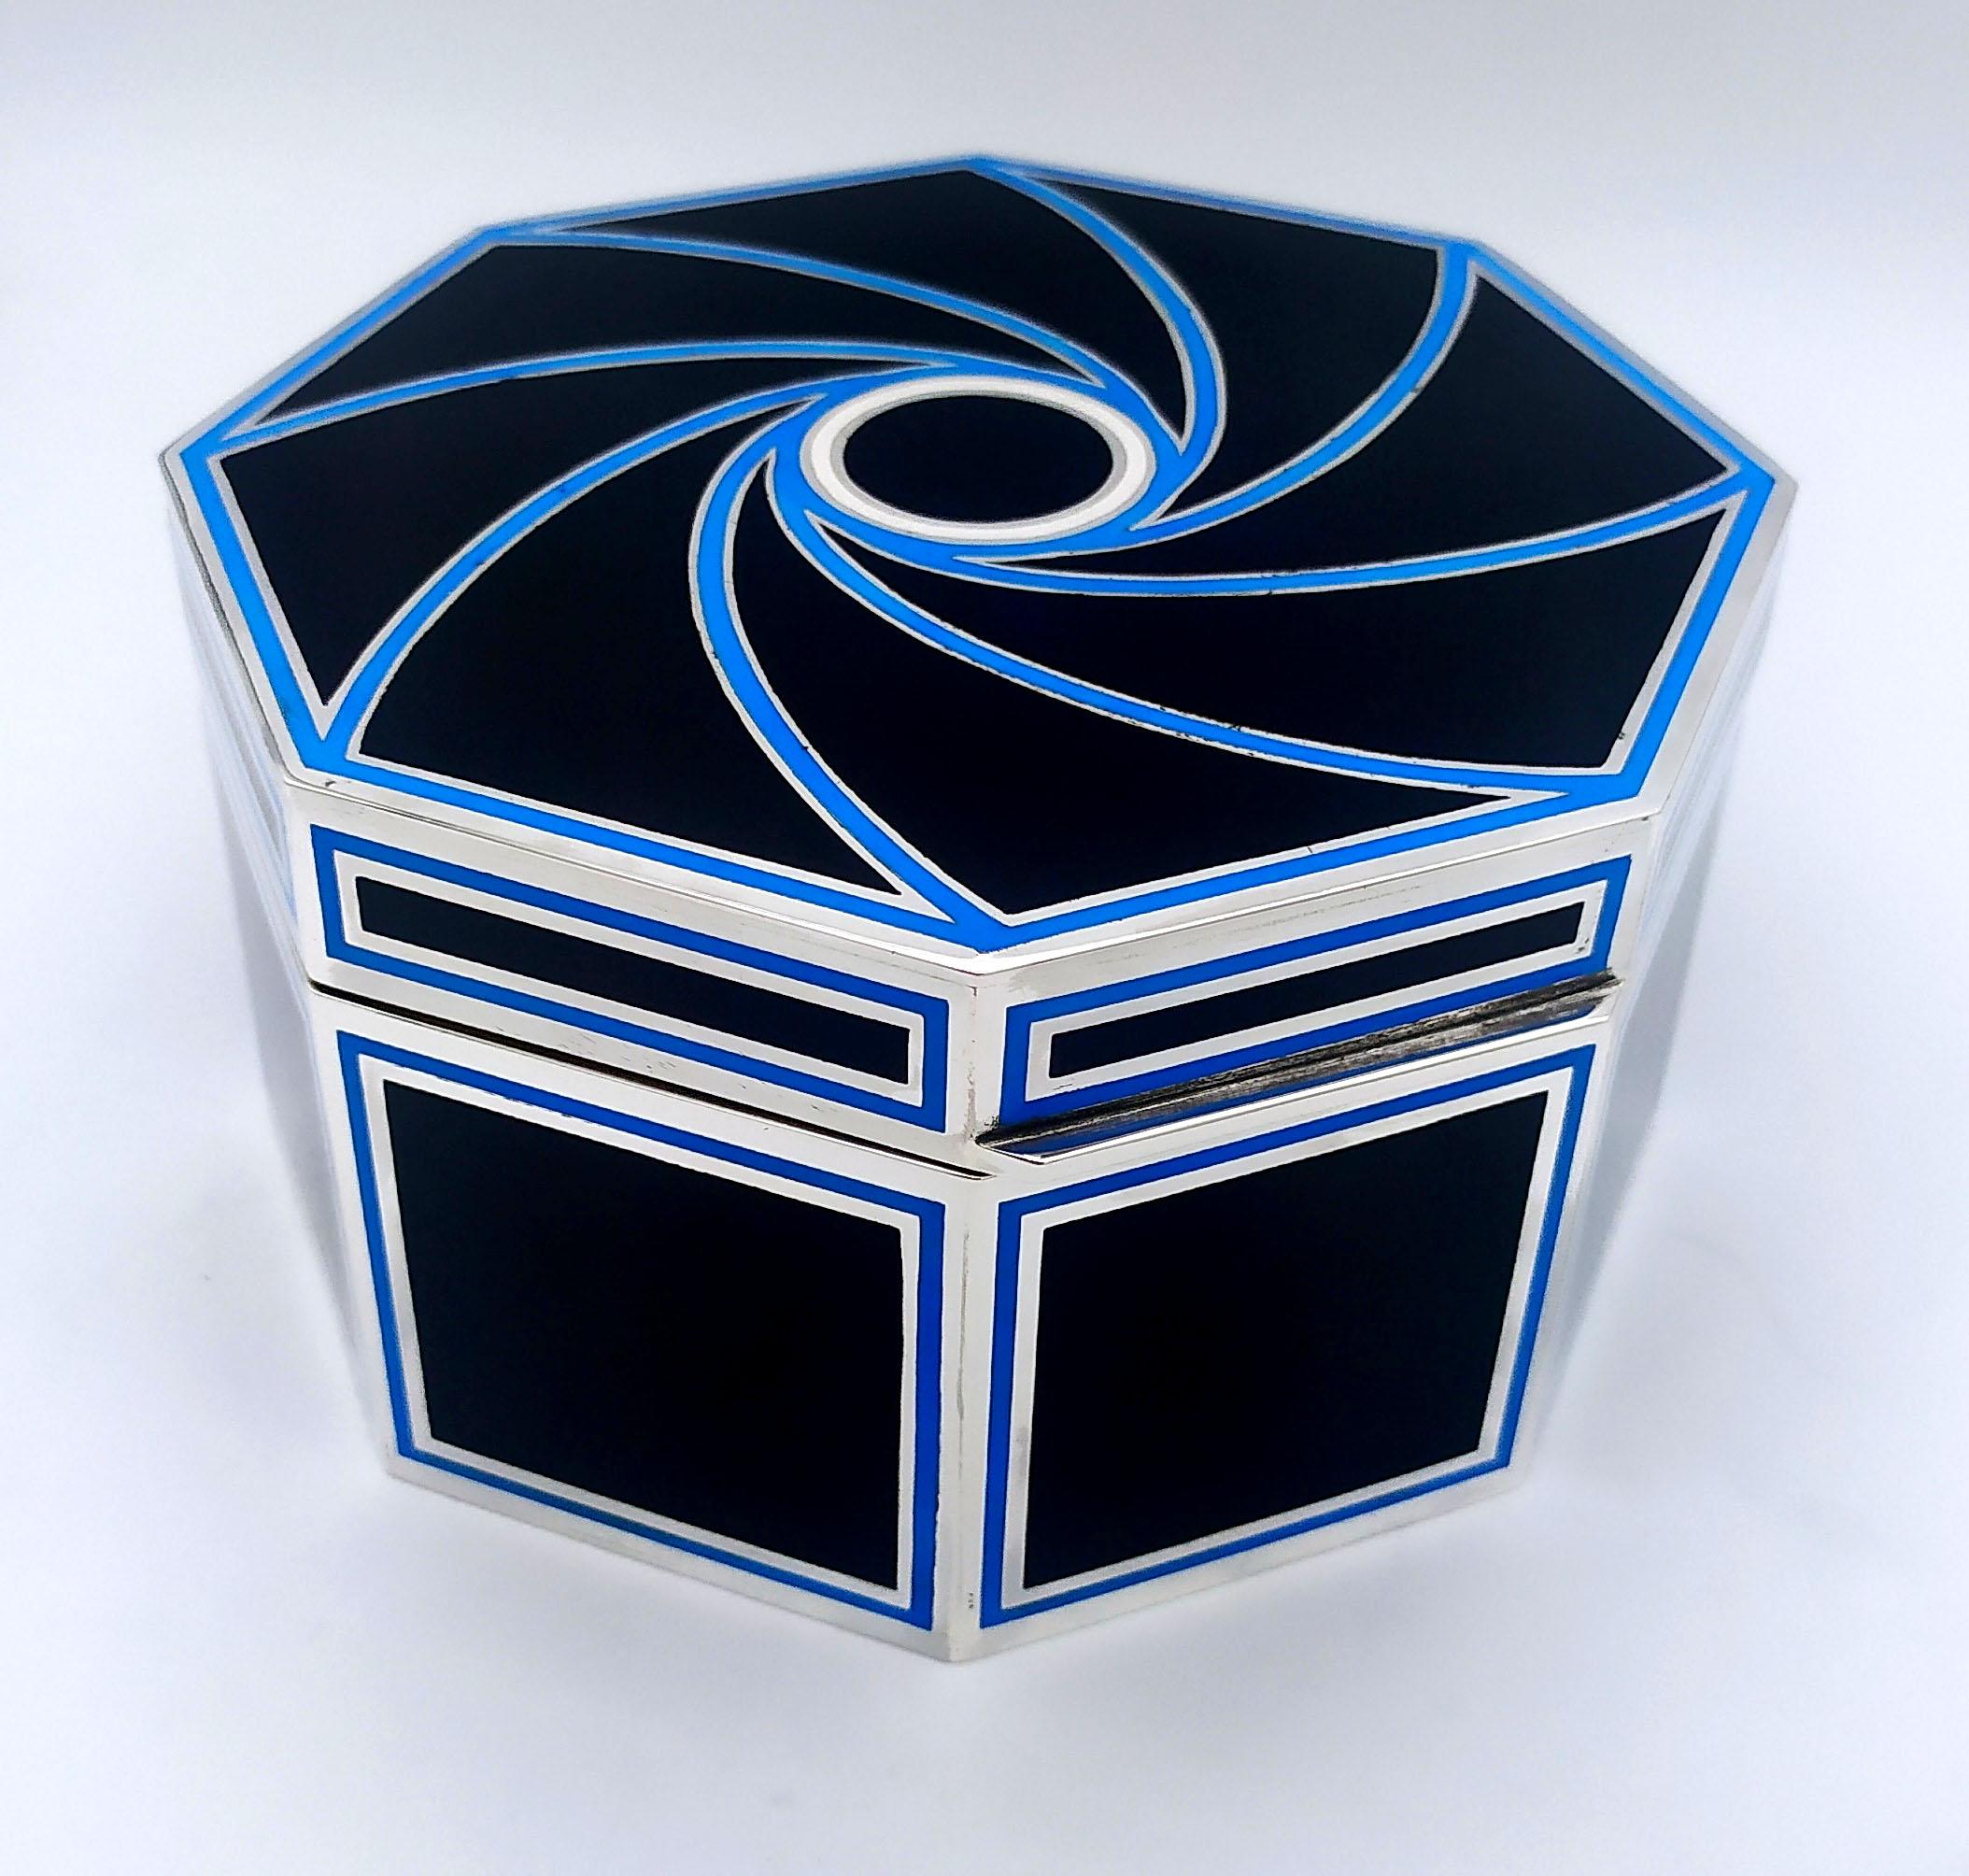 Octagonal table box in 925/1000 sterling silver with fire-enamelled Art Deco design. Dimensions diameter cm. 15.8 high cm . 8.2. Weight gr. 974. Designed by Giorgio Salimbeni for Cartier USA in the 1980s, inspired by objects designed by Louis